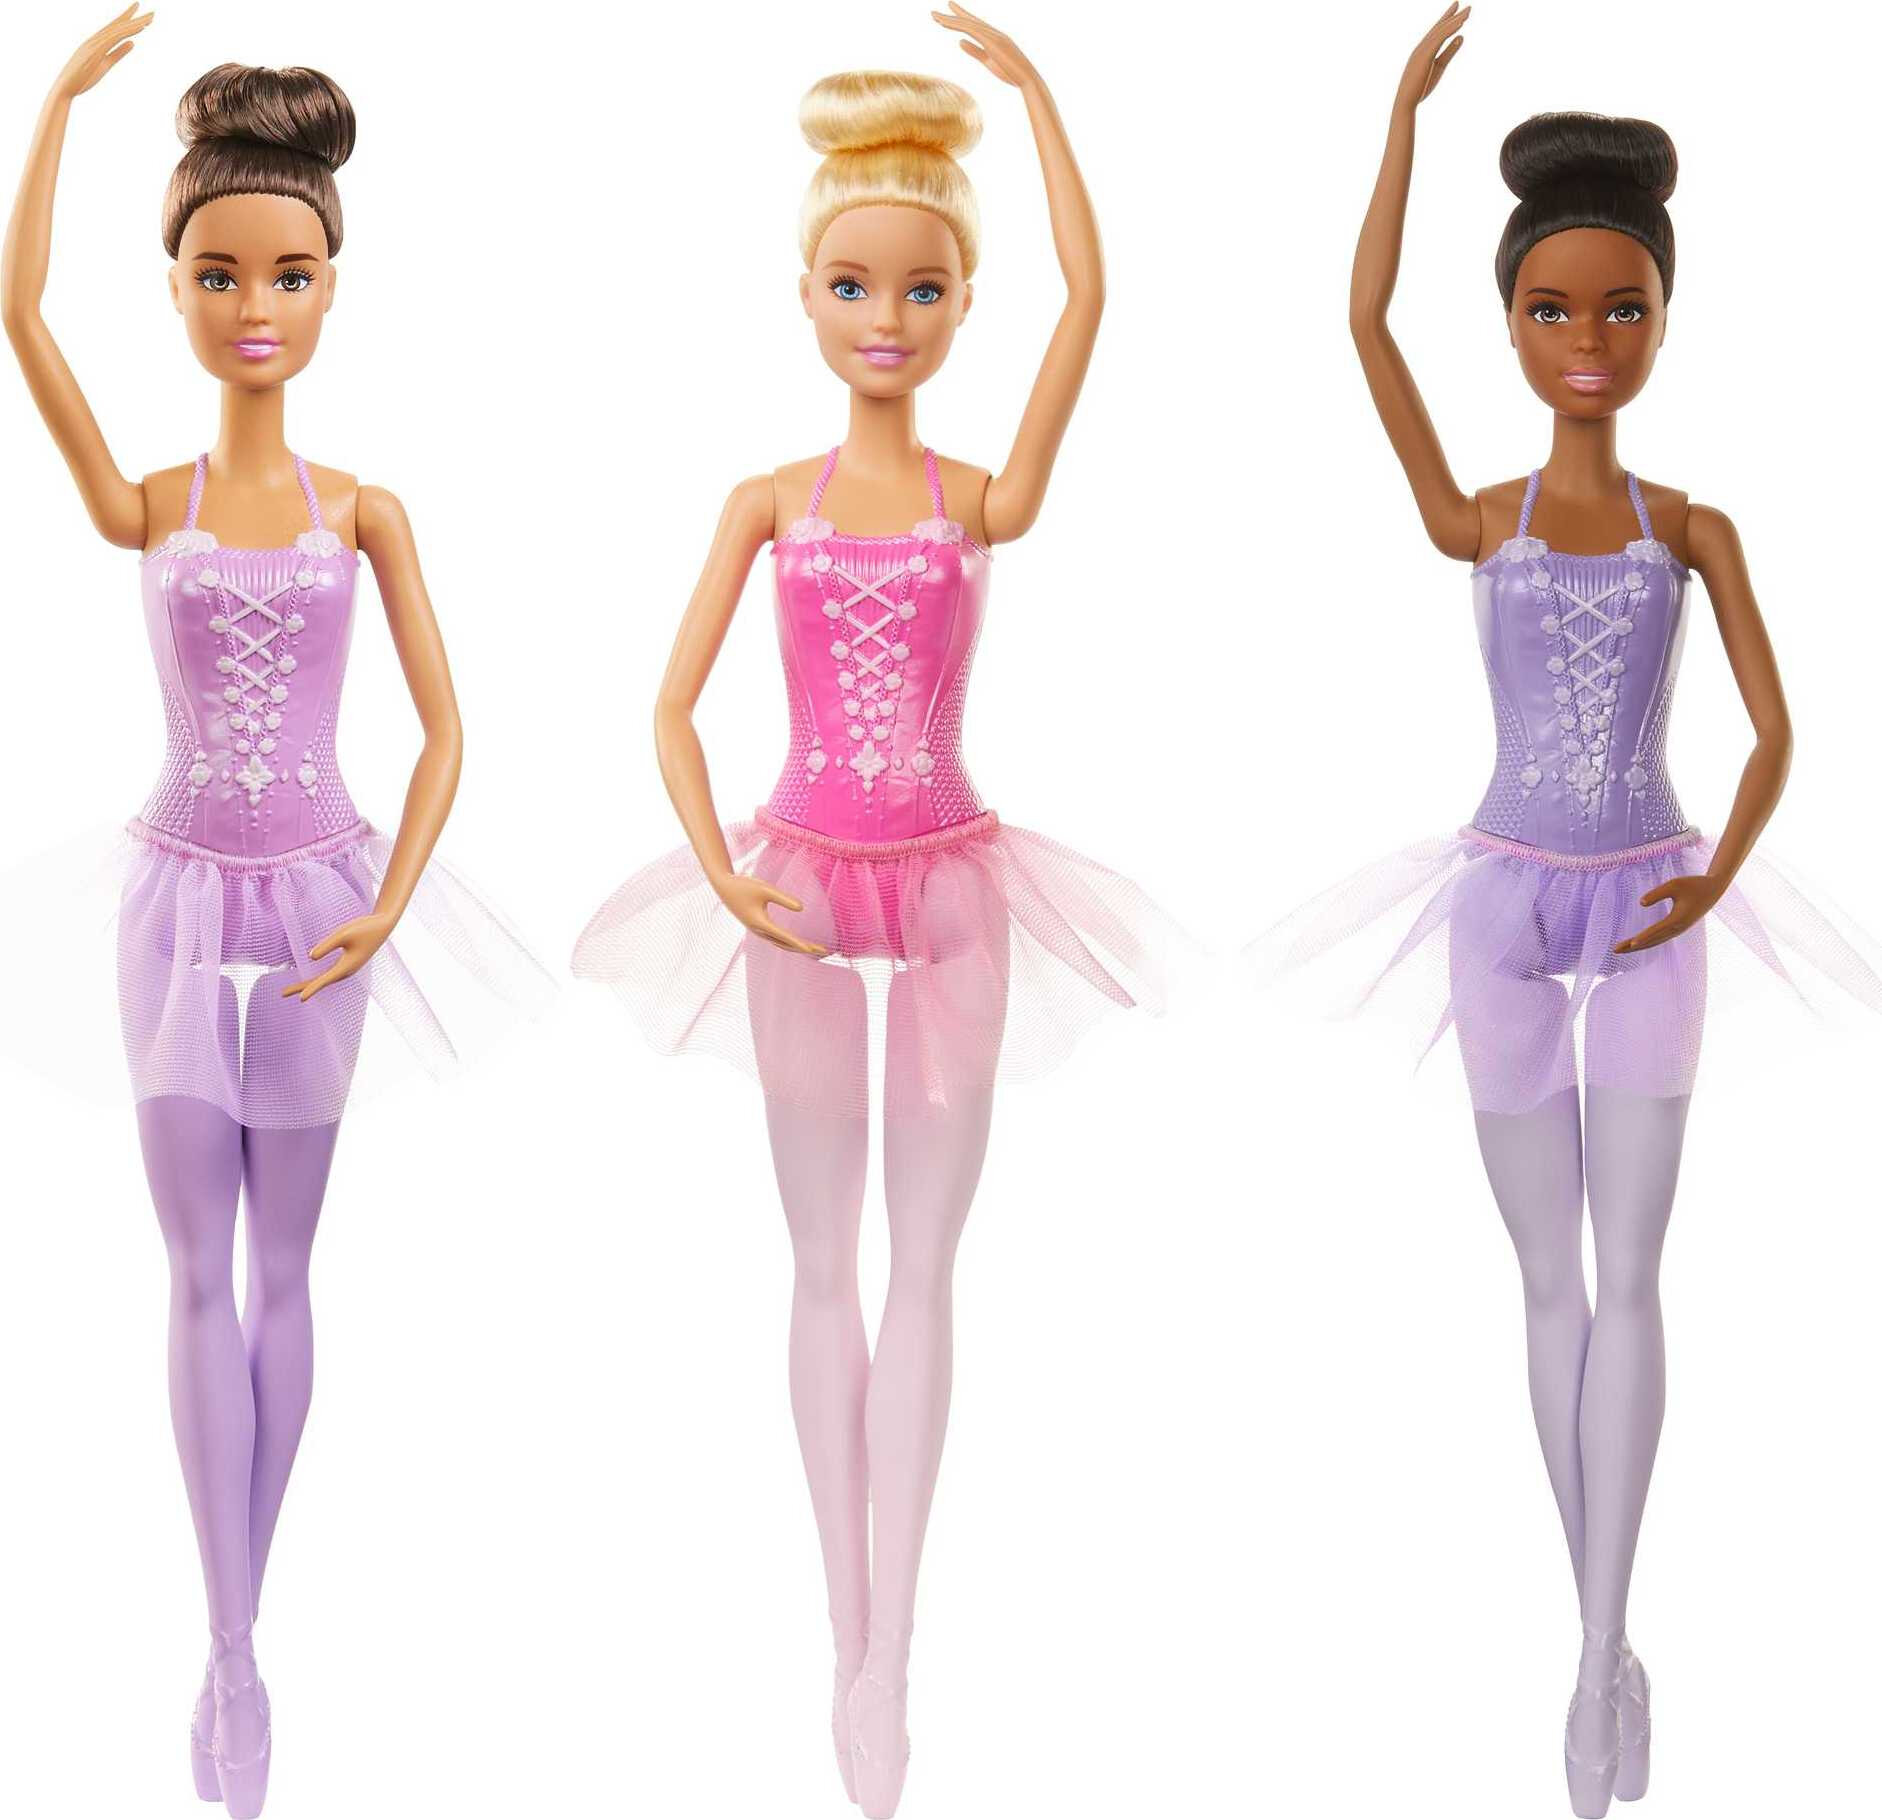 Barbie Ballerina Doll with Tutu, Ballet Arms & Sculpted Toe Shoes (Styles May Vary) - image 1 of 4